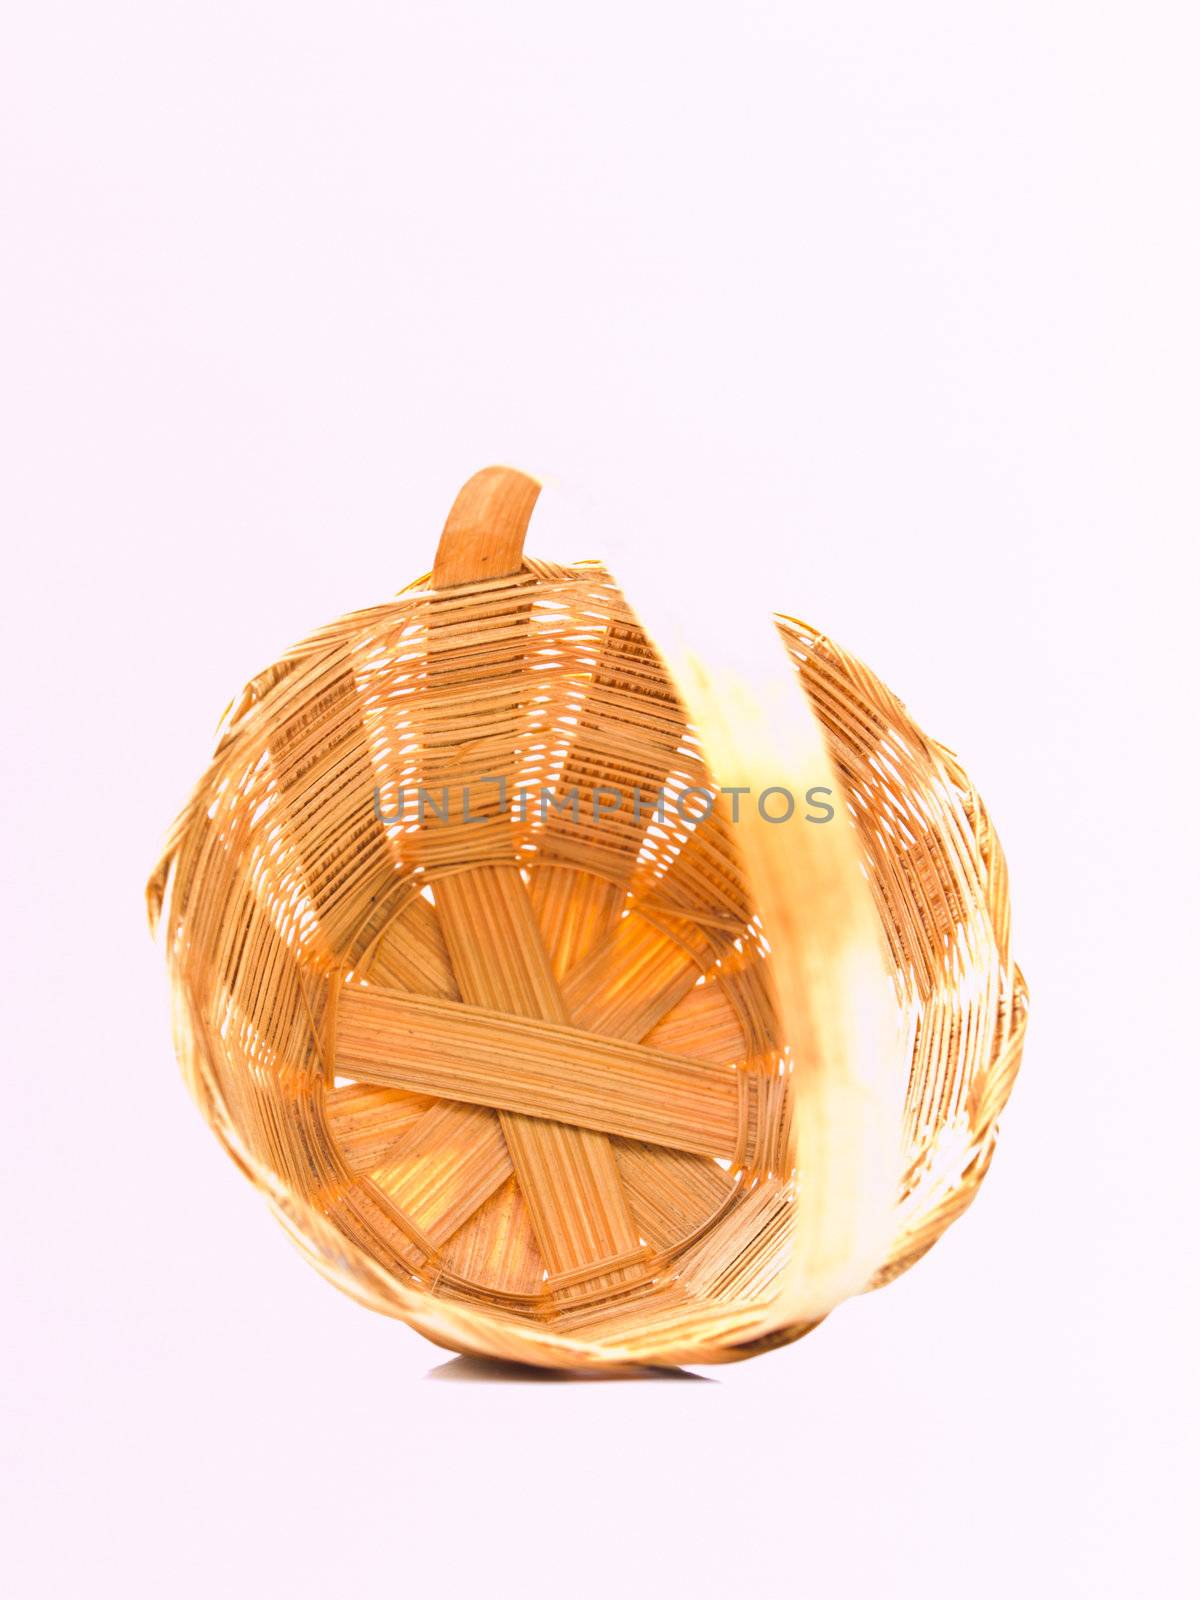 A yellow wicker basket isolated on white background